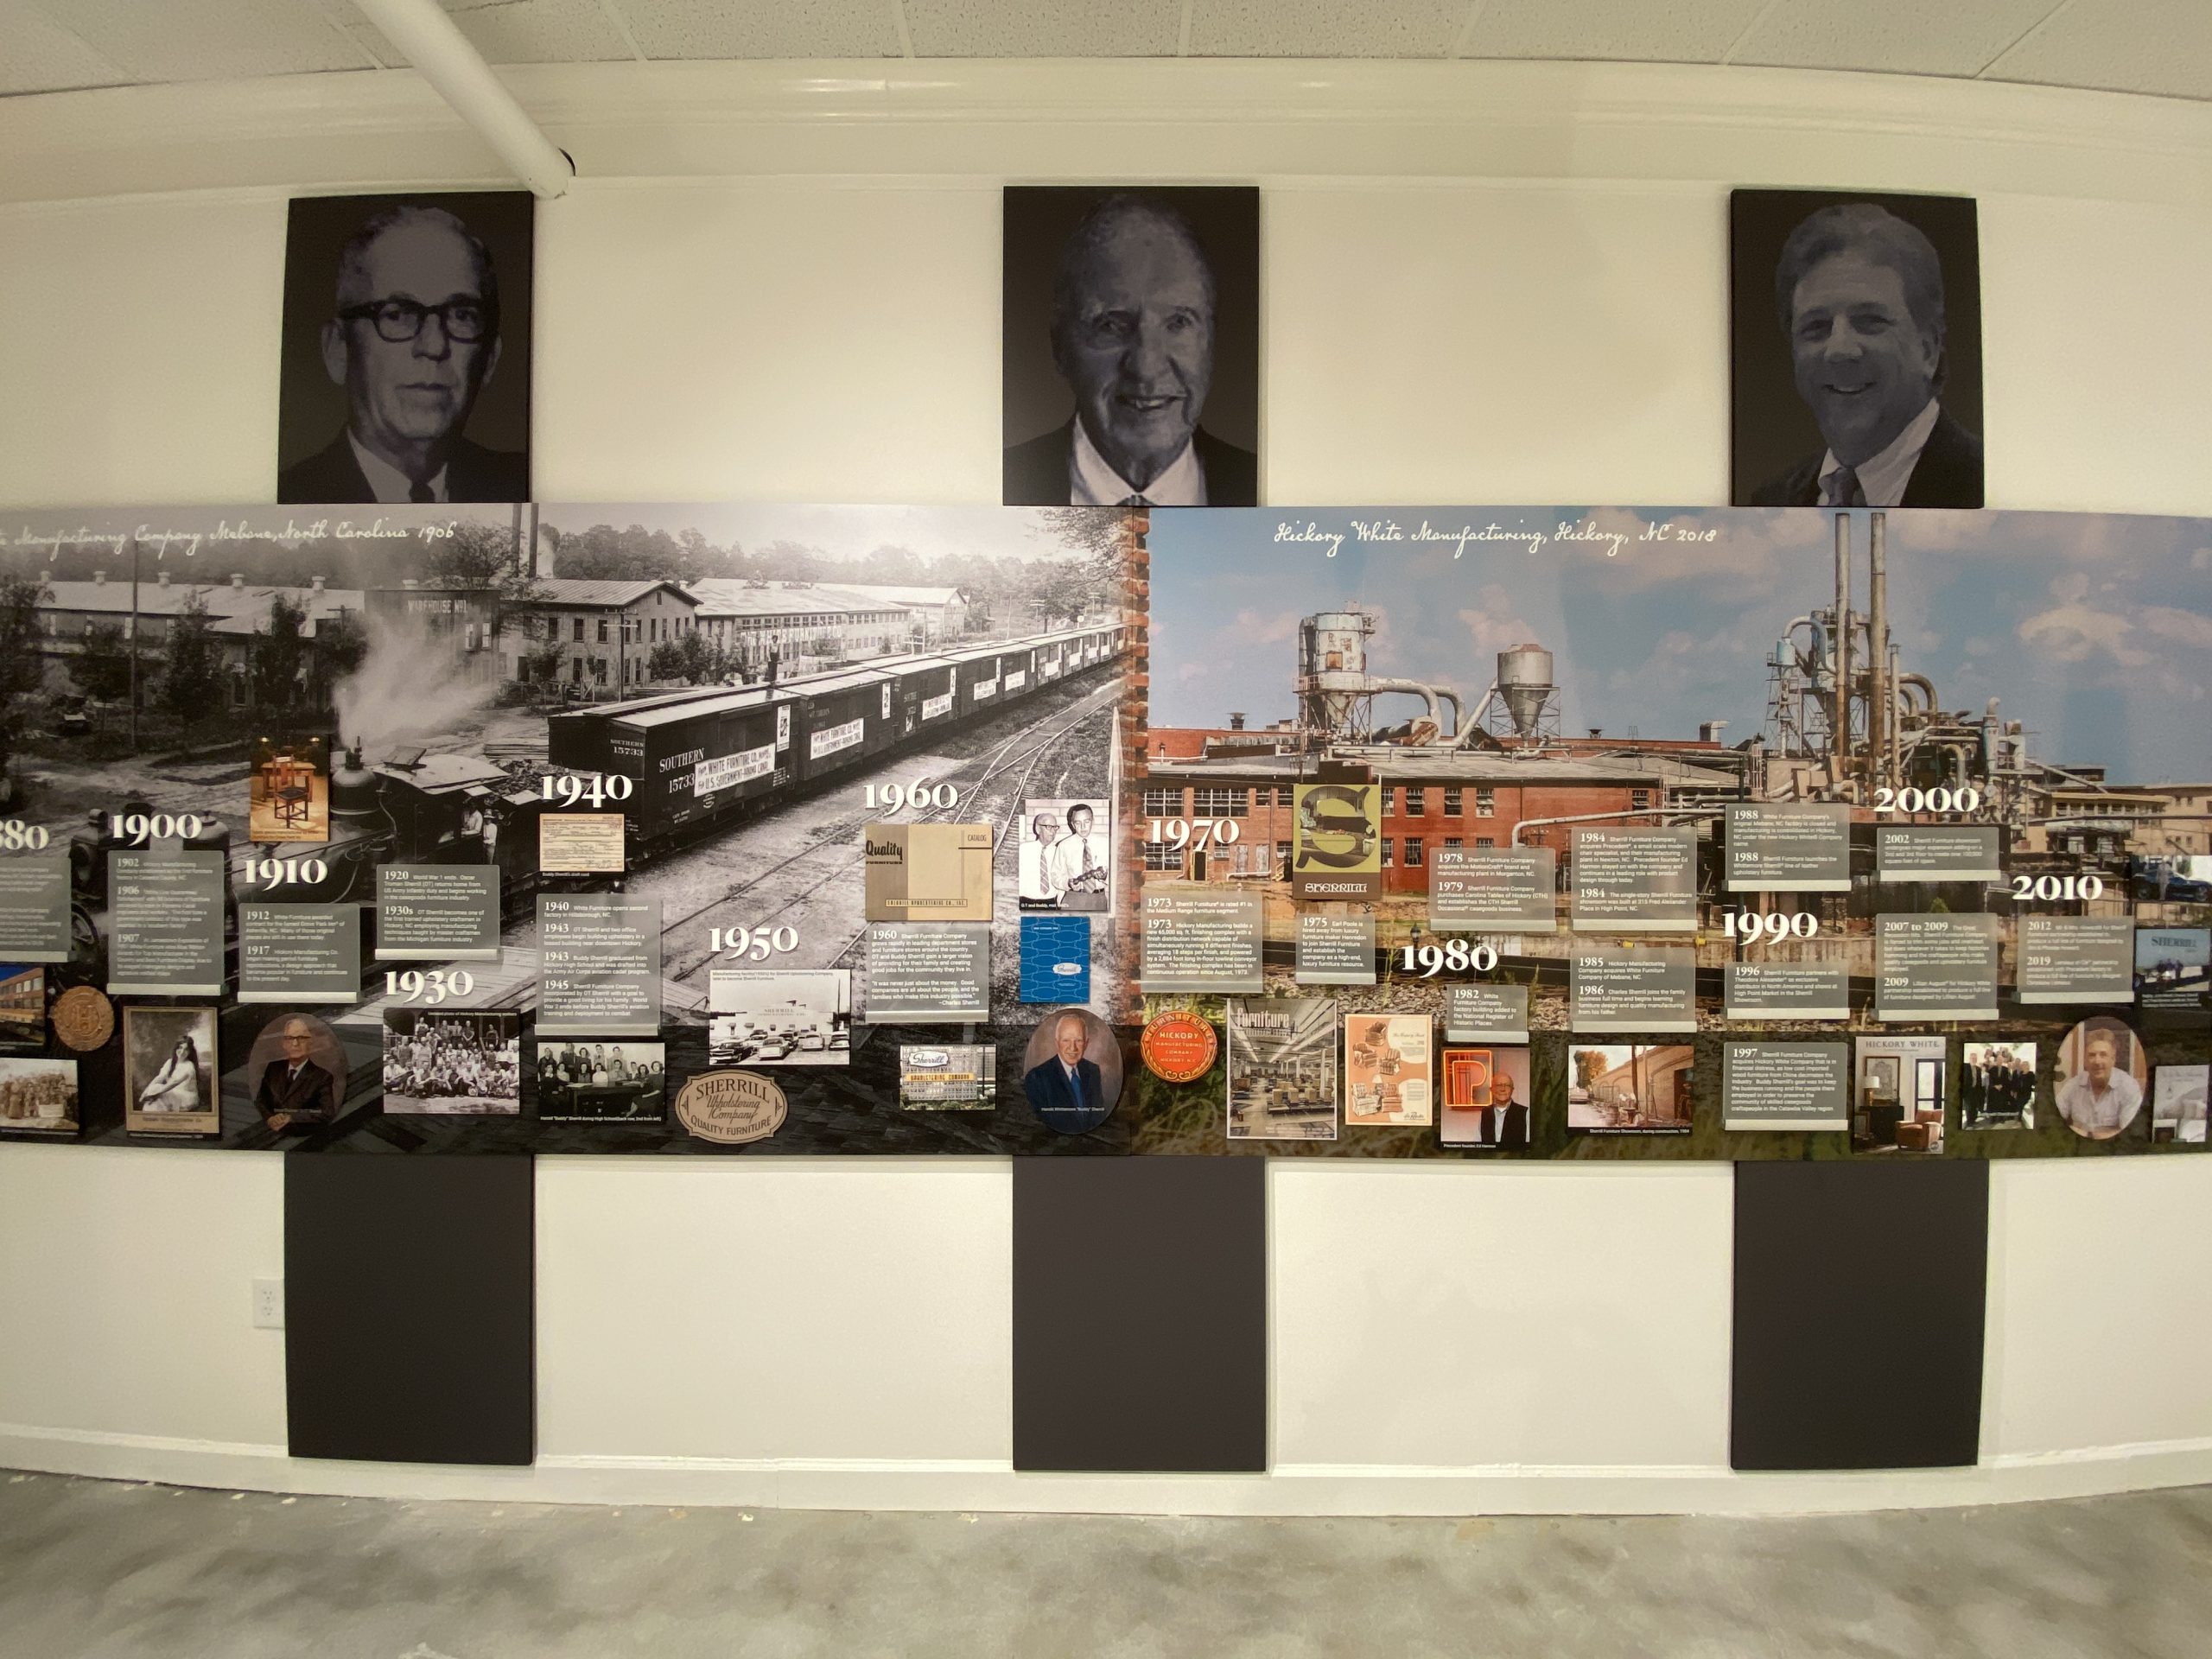 High Point Furniture Market Timeline Wall Display Project Spotlight